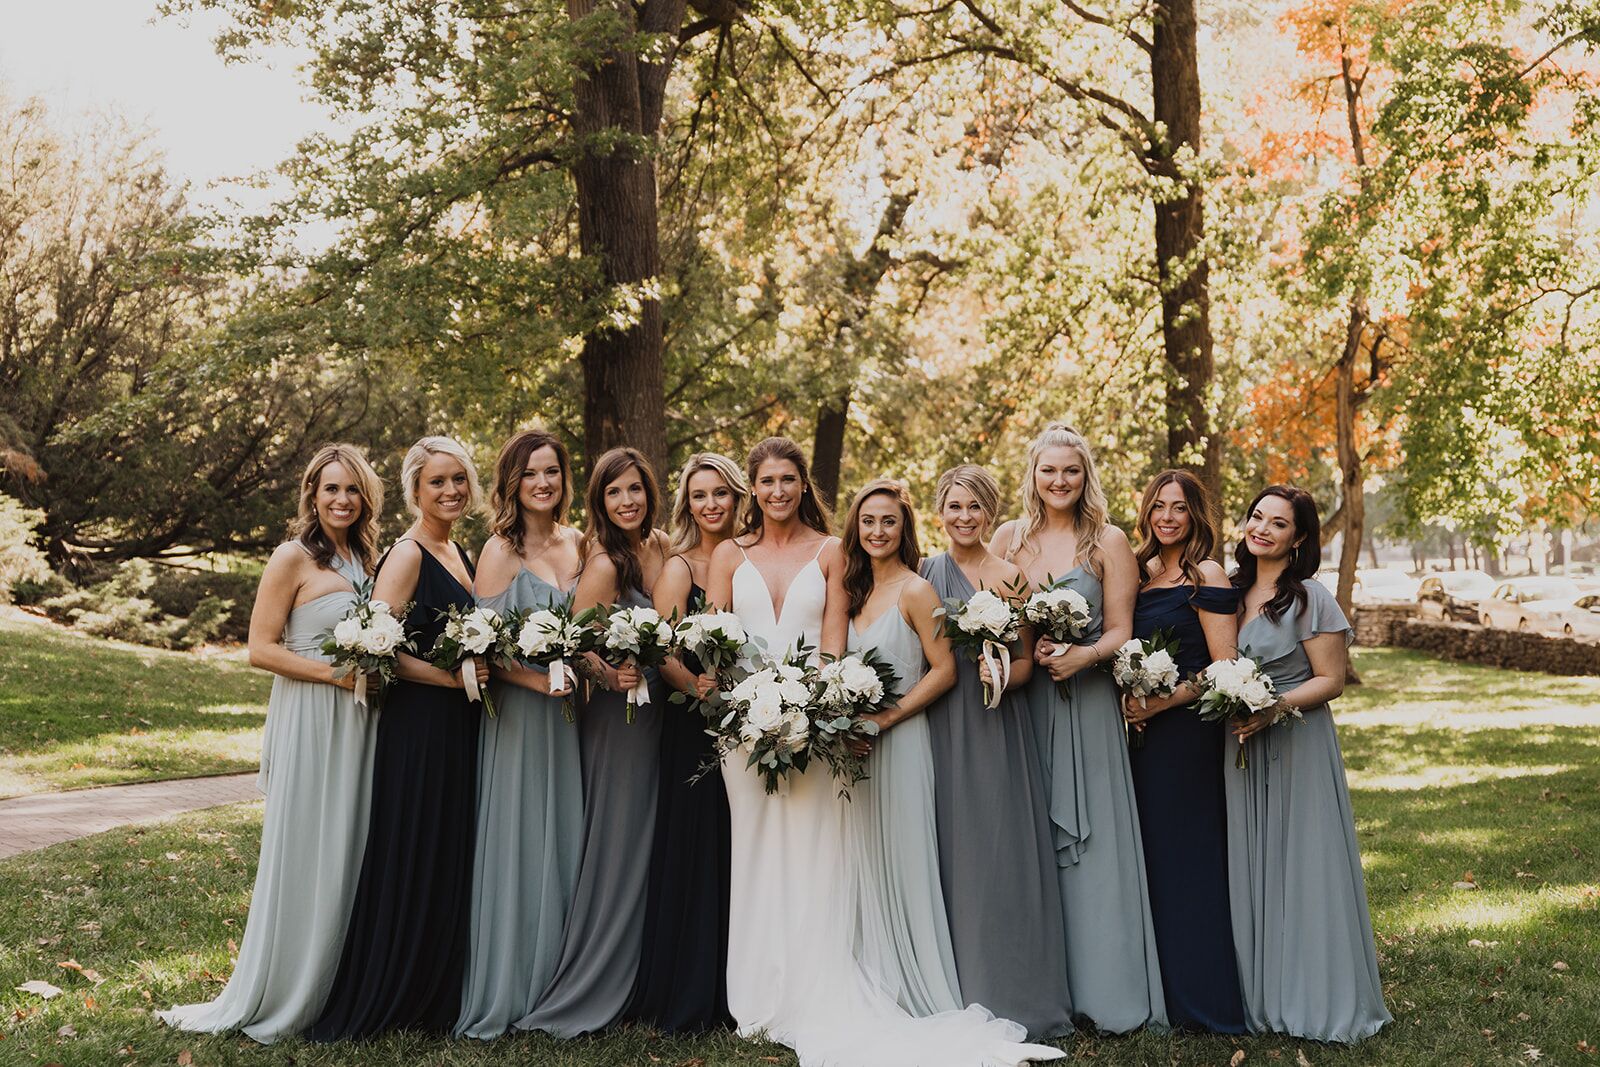 Modern Brides by Ashley Fancher | Beauty - The Knot